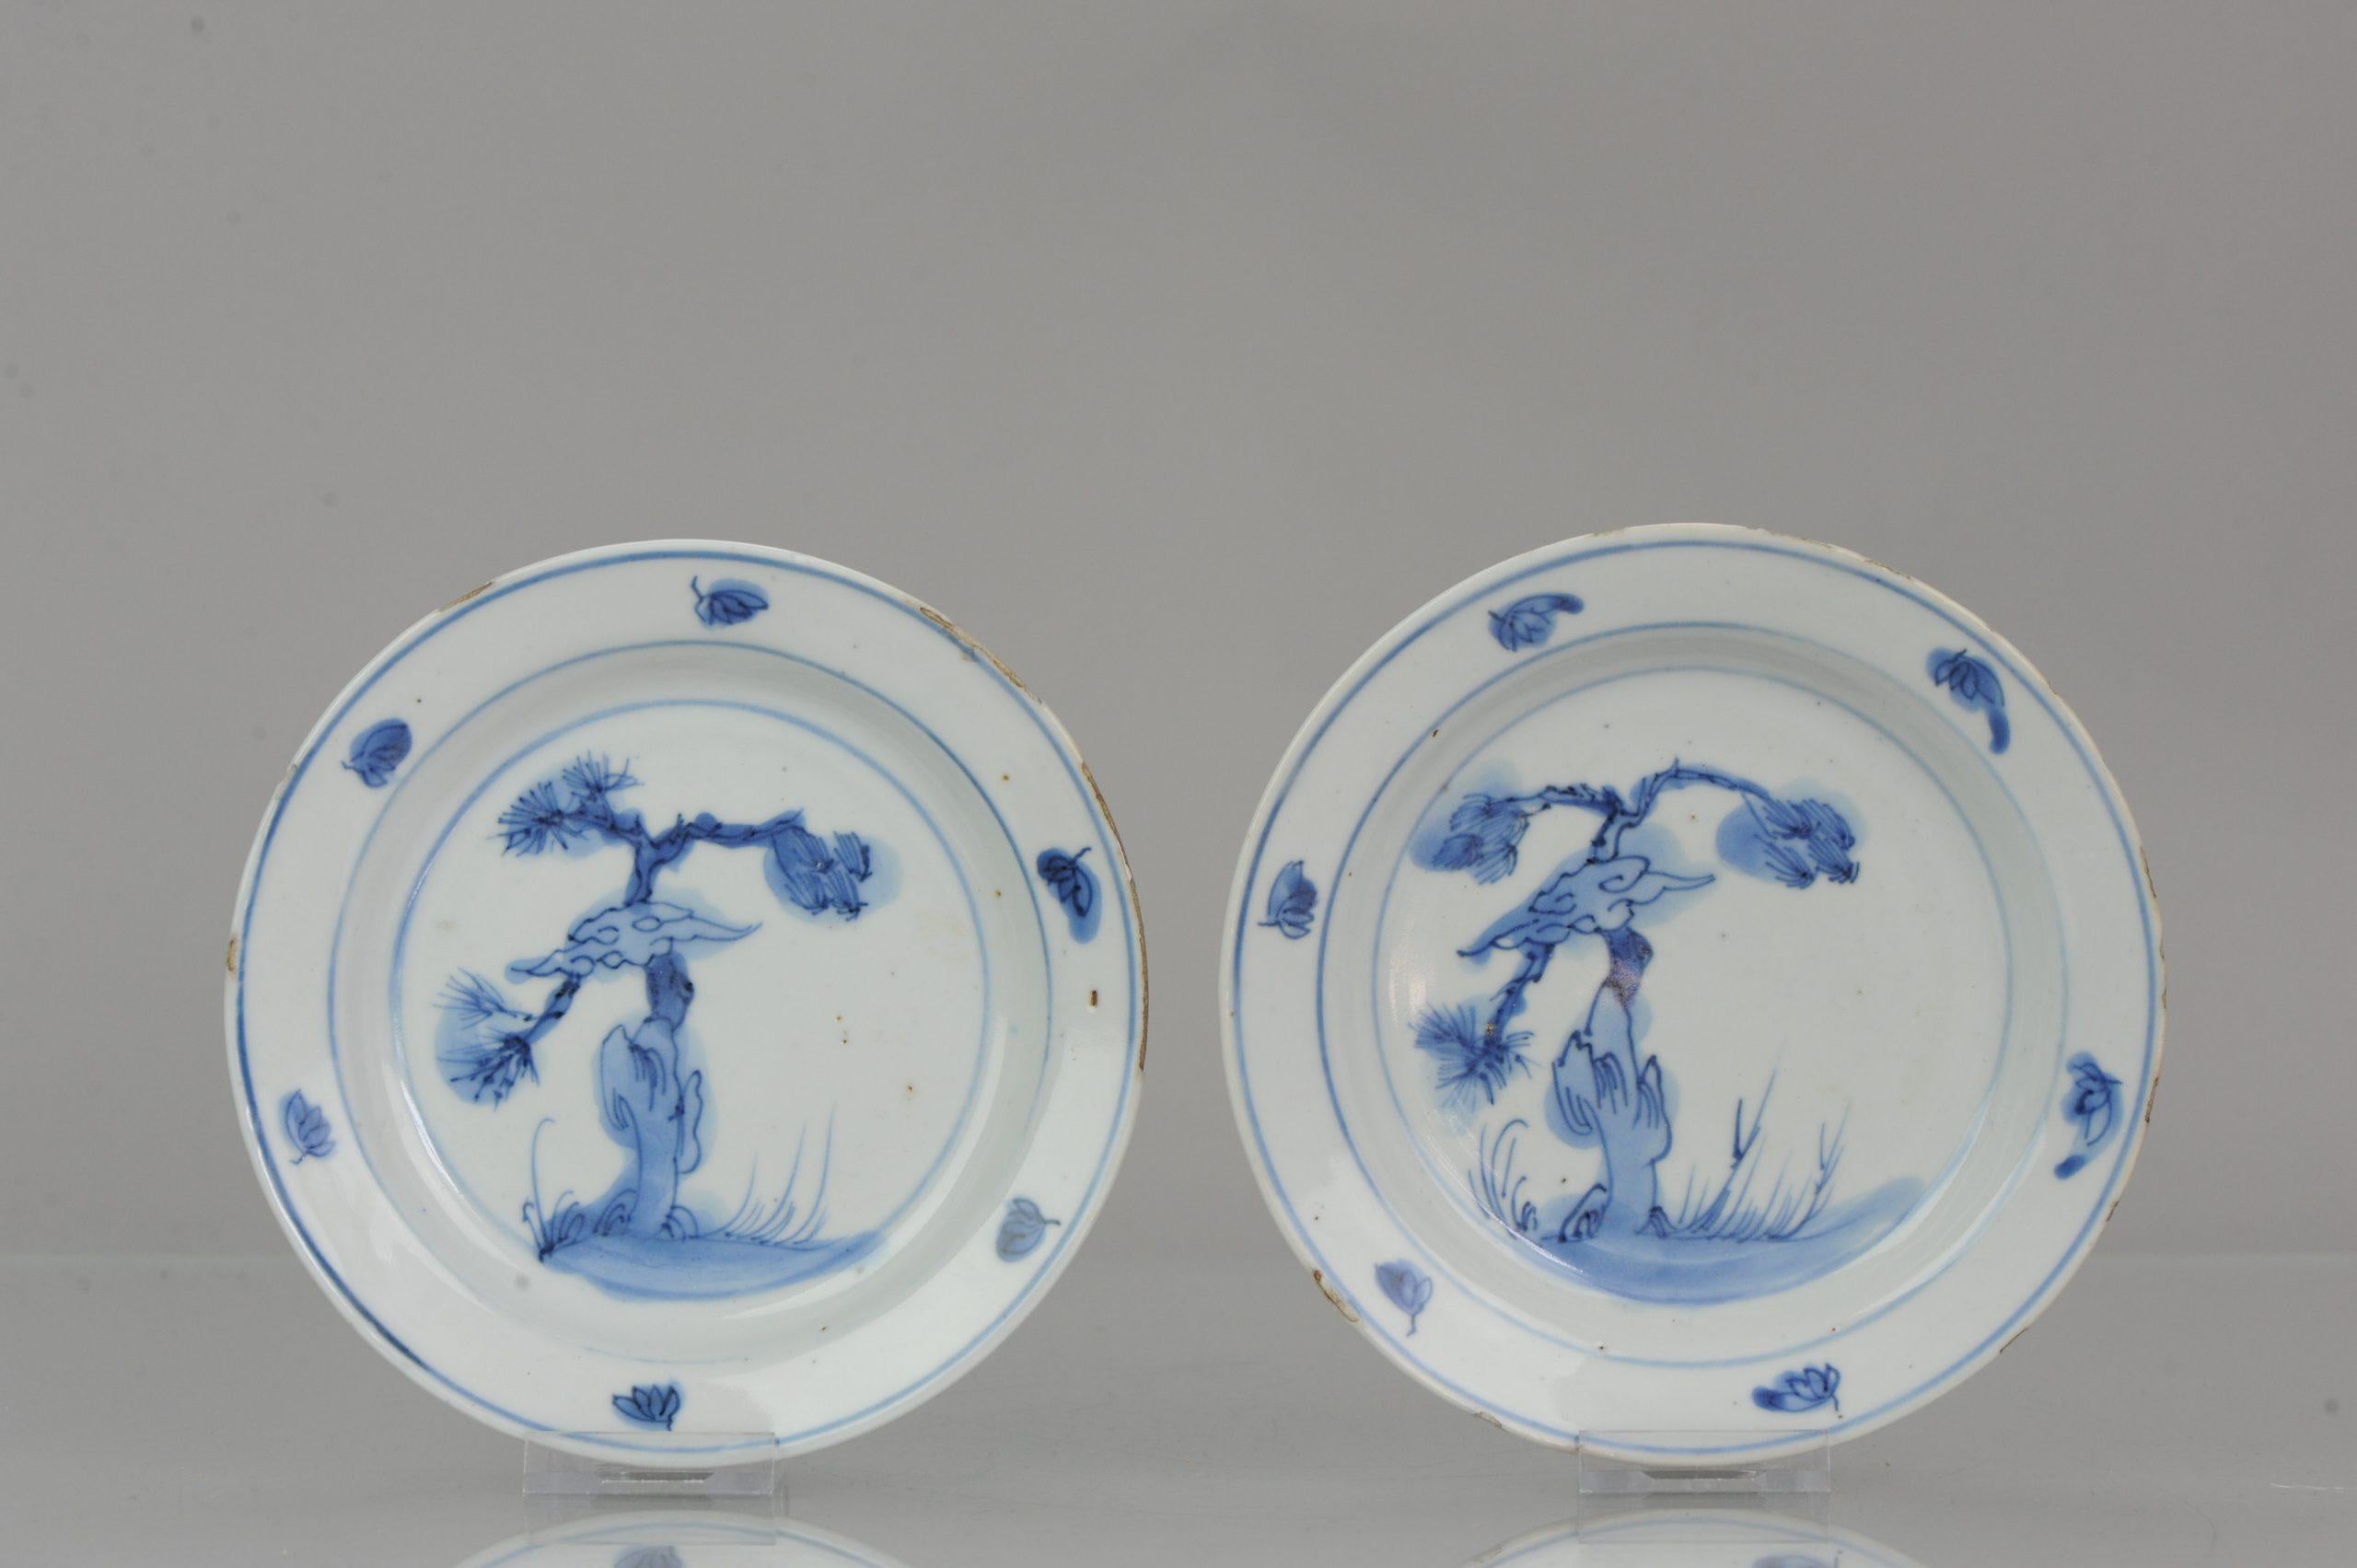 A blue & white Kosometsuke plate with a lovely scene of a gnarled pine tree.
A gnarled pine tree, which may represent either survival in a harsh political environment or the unconquerable spirit of old age.

Condition
Both with typical